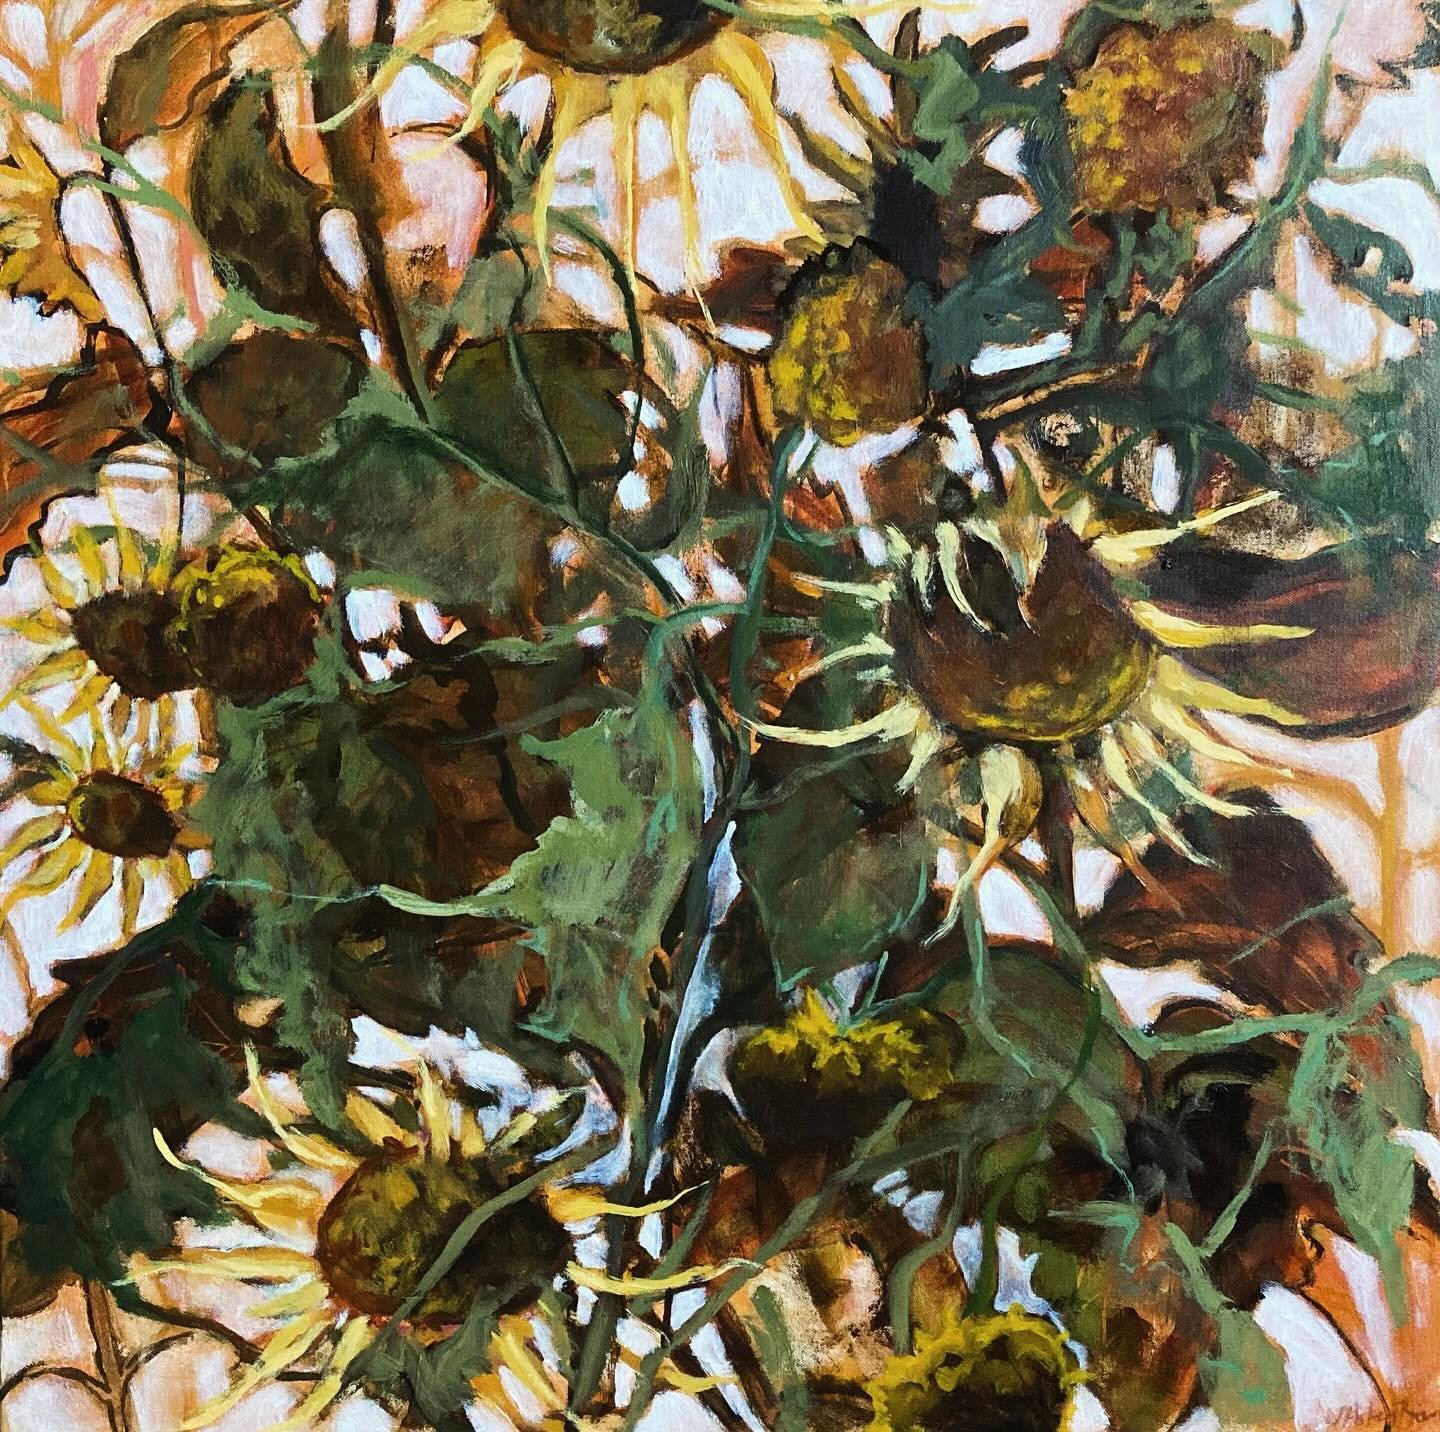 I made the sketches for this painting during the heat of last September. It&rsquo;s been worked on bit by bit but now it&rsquo;s ready to show. Somethings just take time!
#judeaskeybrown #oilpainting #sunflowers  #kentandsussex #ashfordvisualartists